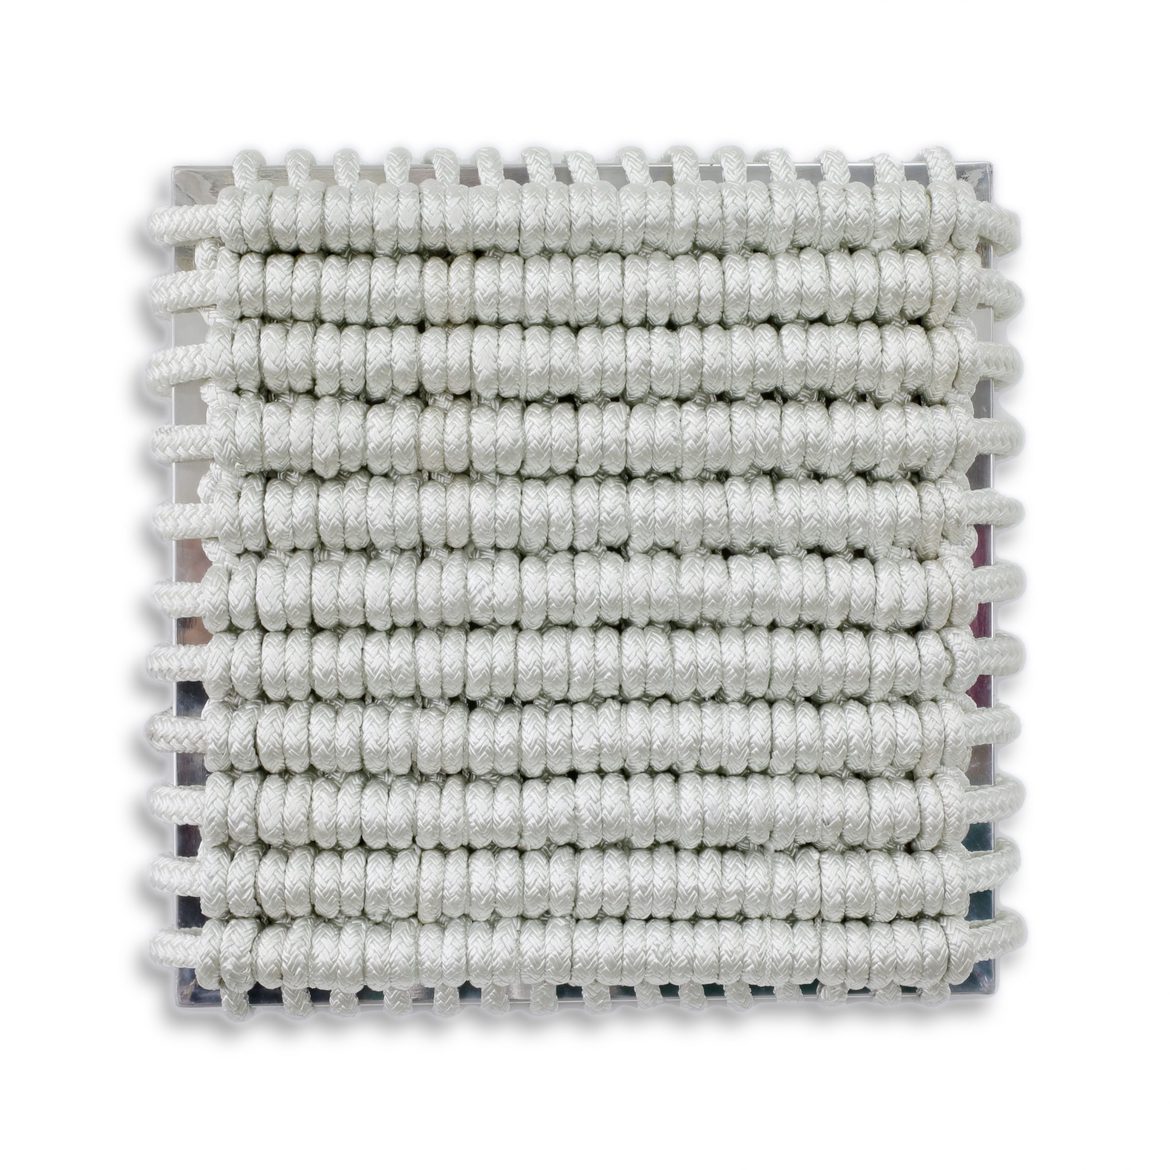 'Between #1', 2020, polyester and polypropylene rope on polished aluminium frame, 65 x 65 x 11 cm